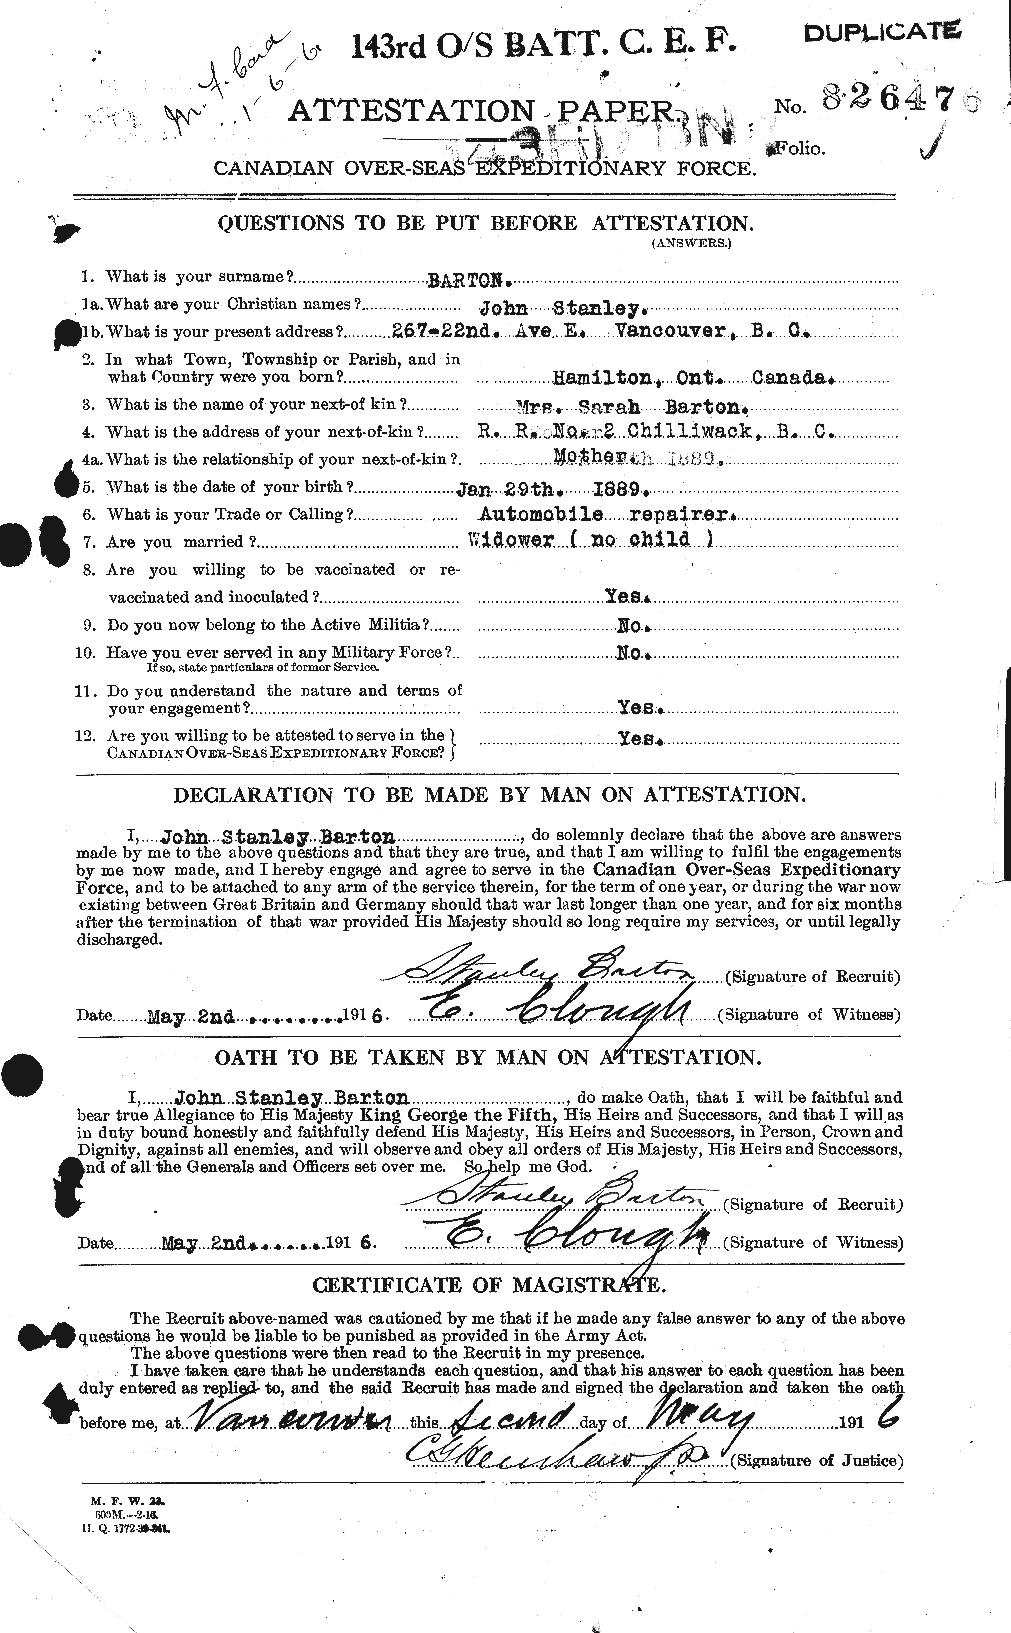 Personnel Records of the First World War - CEF 221392a